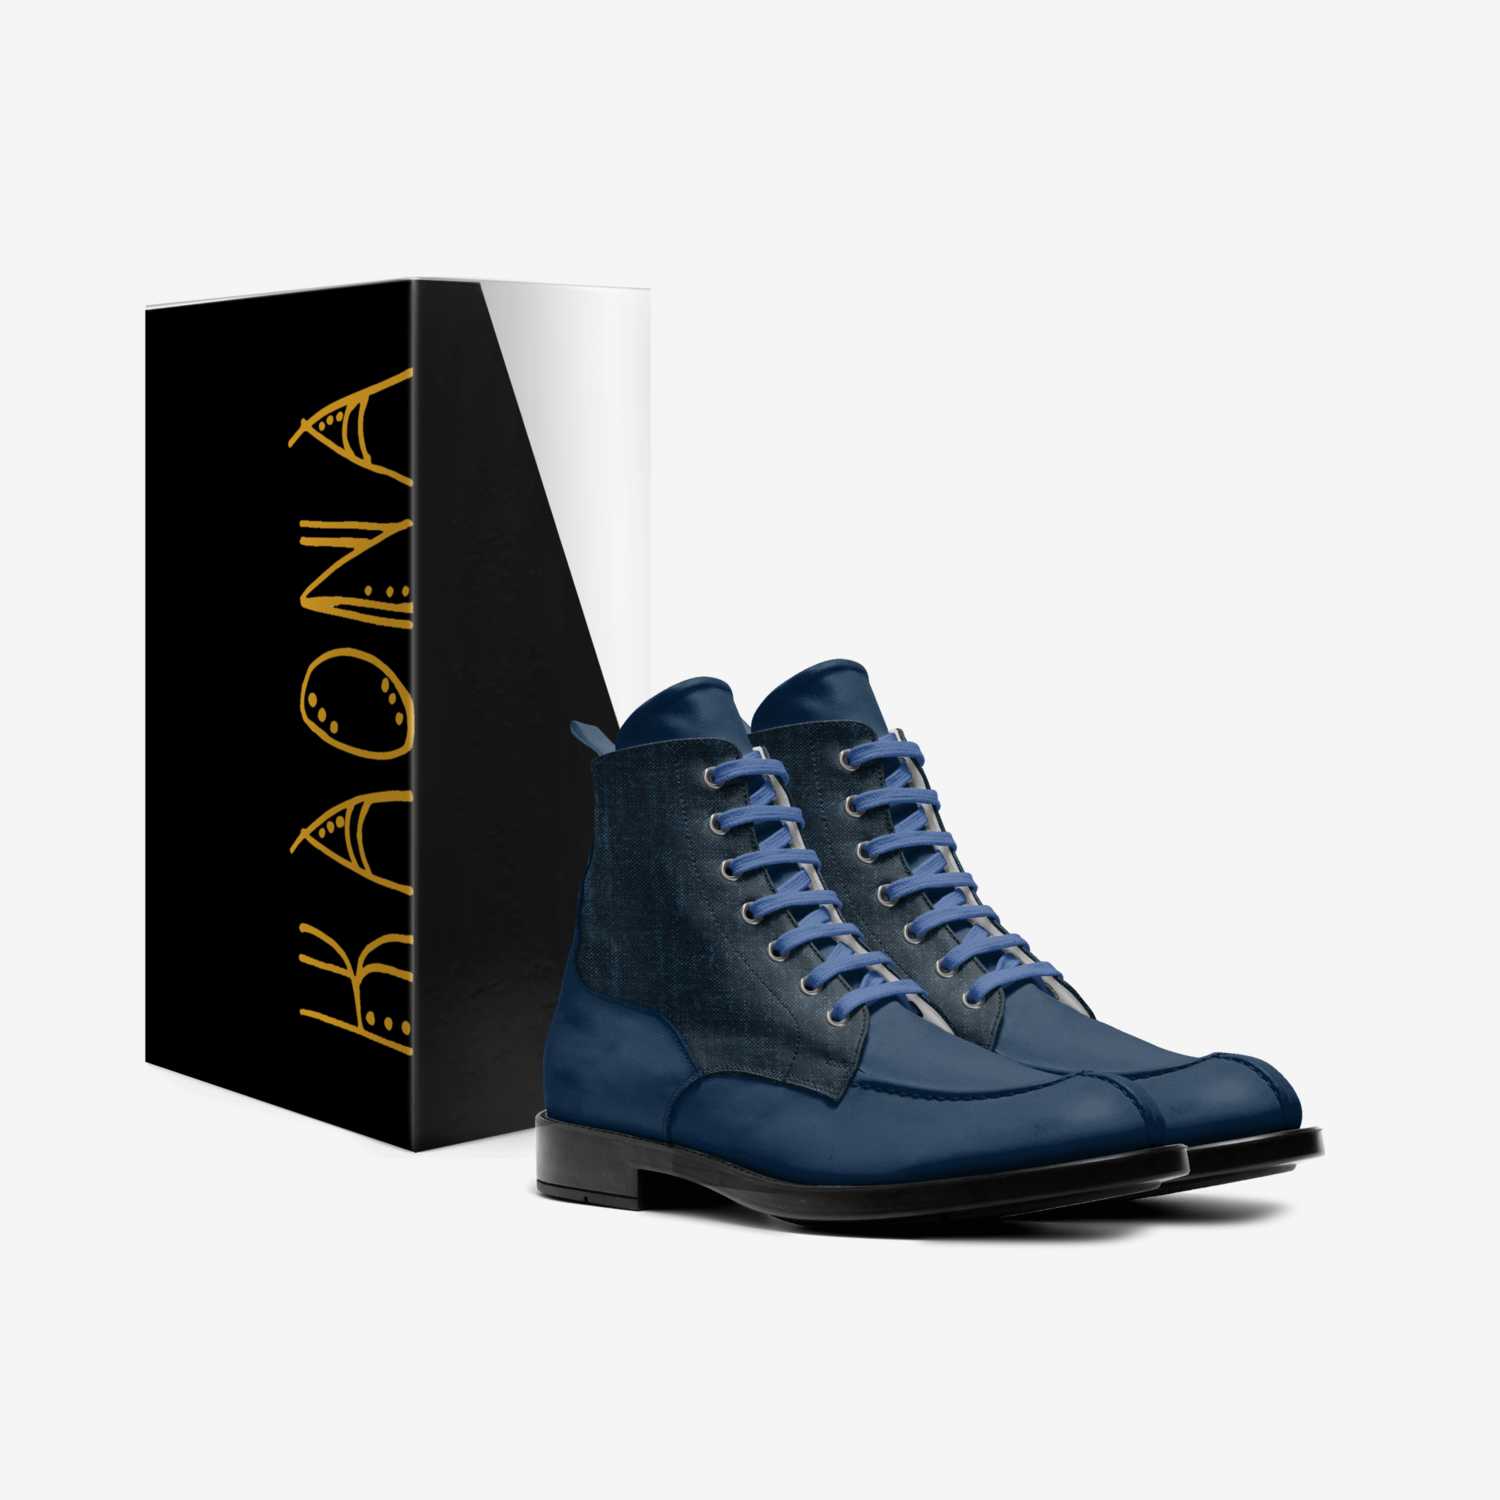 Voyager custom made in Italy shoes by Dominique Karaya | Box view